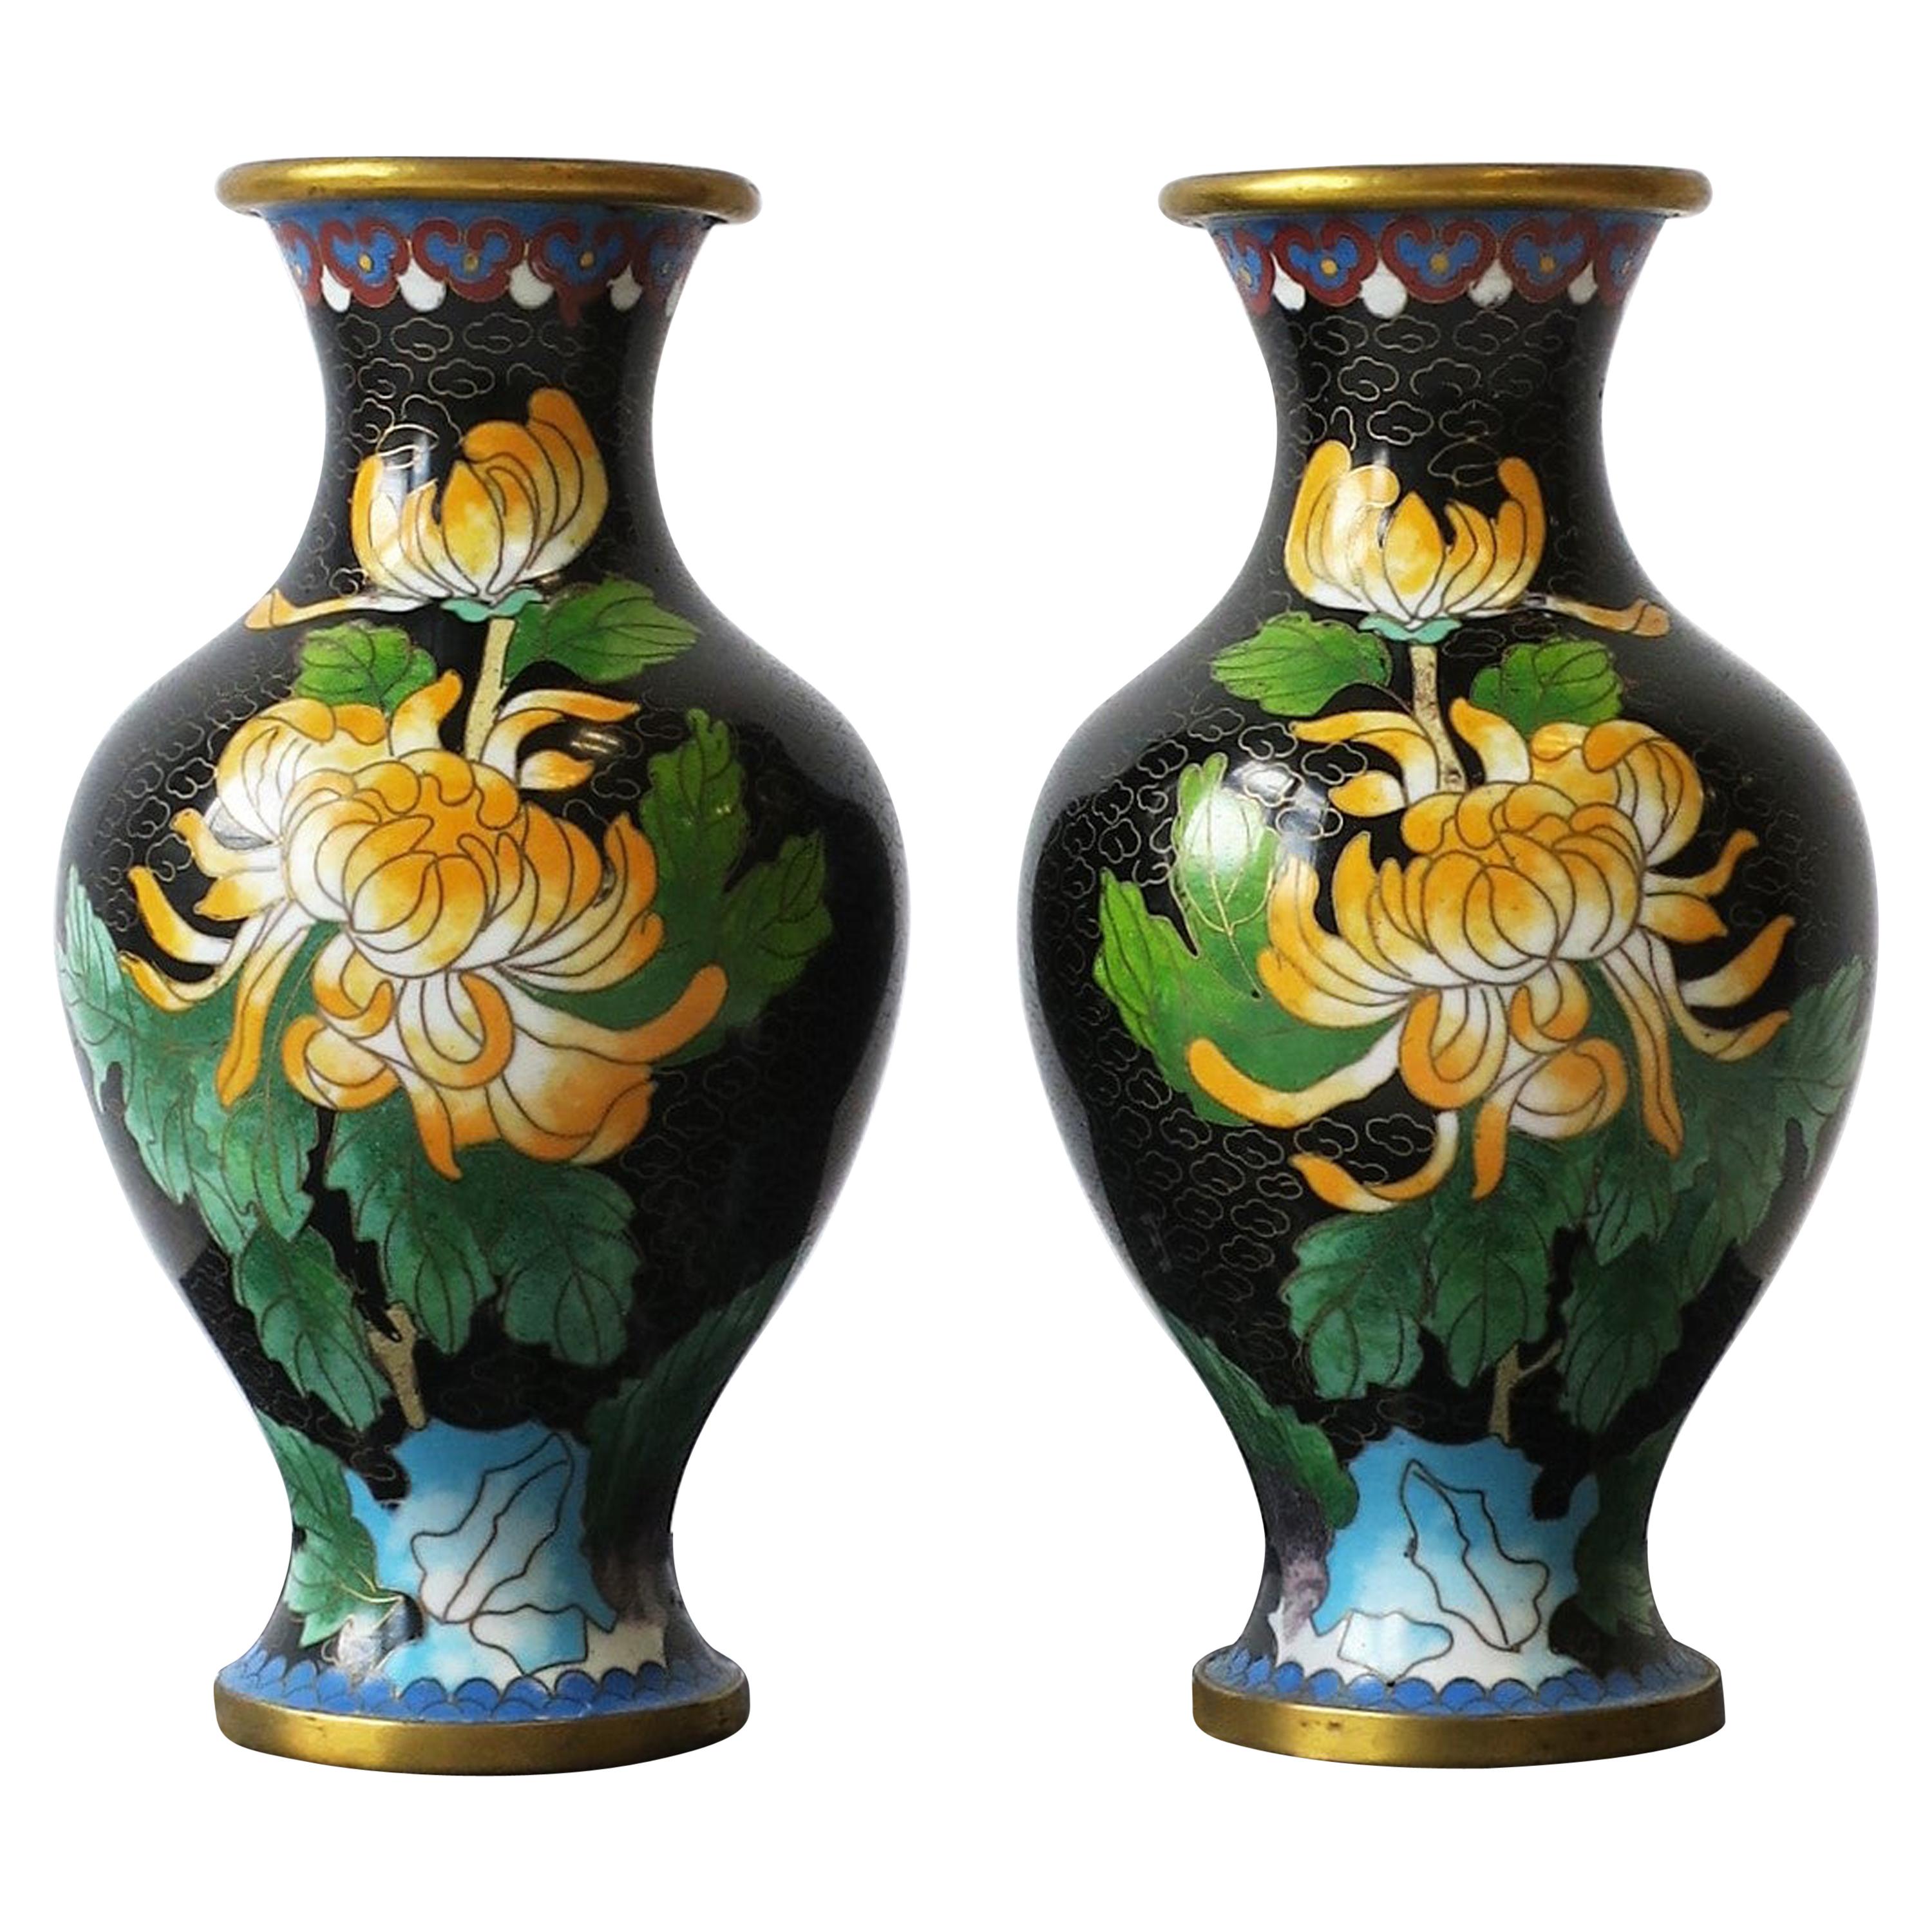 Black and Green Cloisonné́ Enamel and Brass Flower Vases, Pair